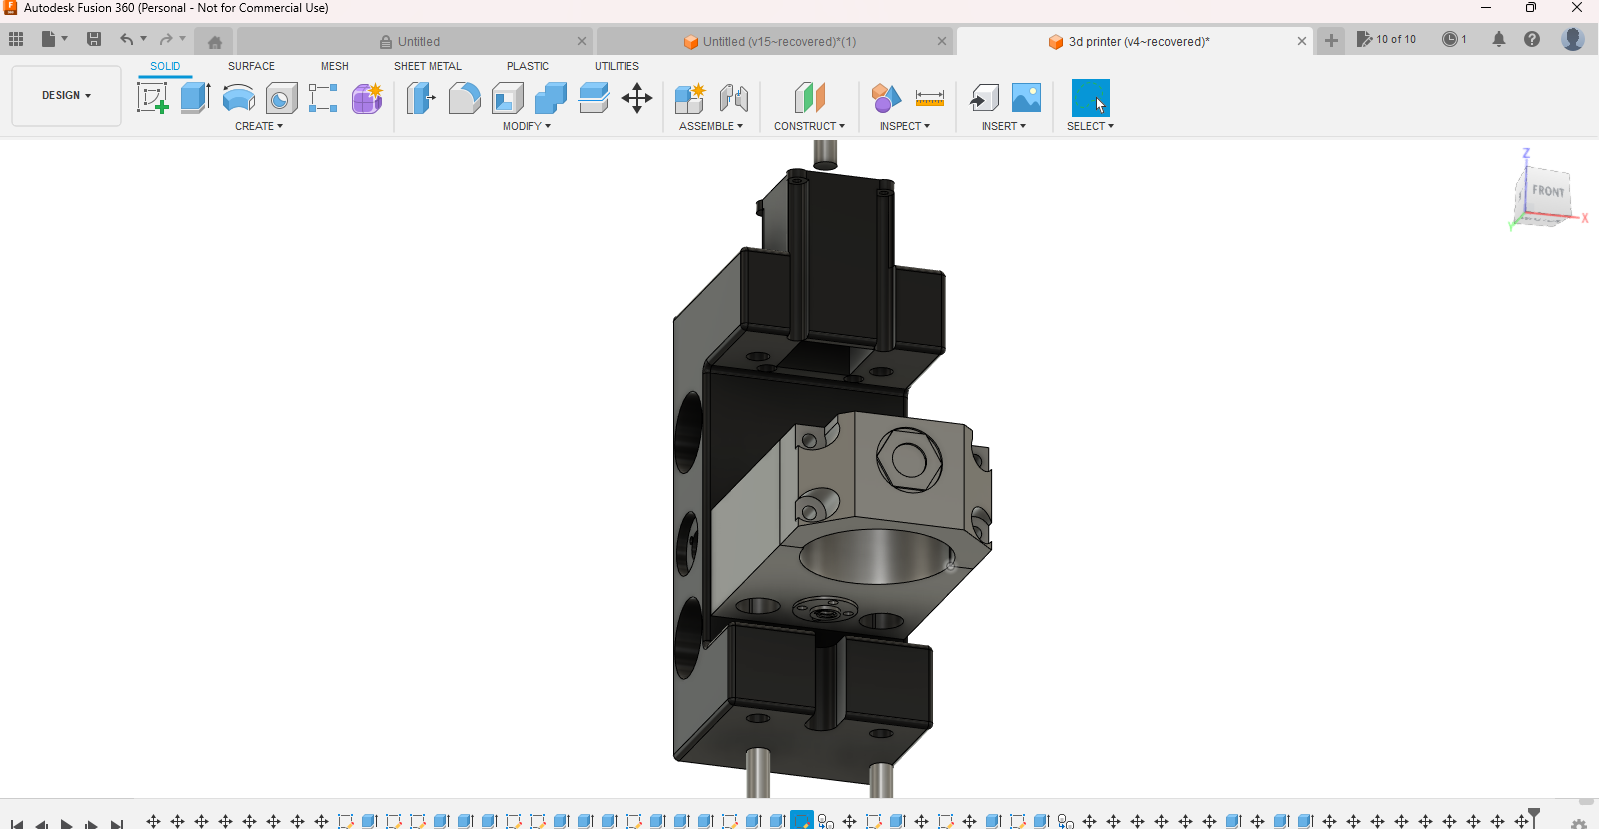 Autodesk Fusion 360 (Personal - Not for Commercial Use) 5_31_2023 7_40_42 PM.png